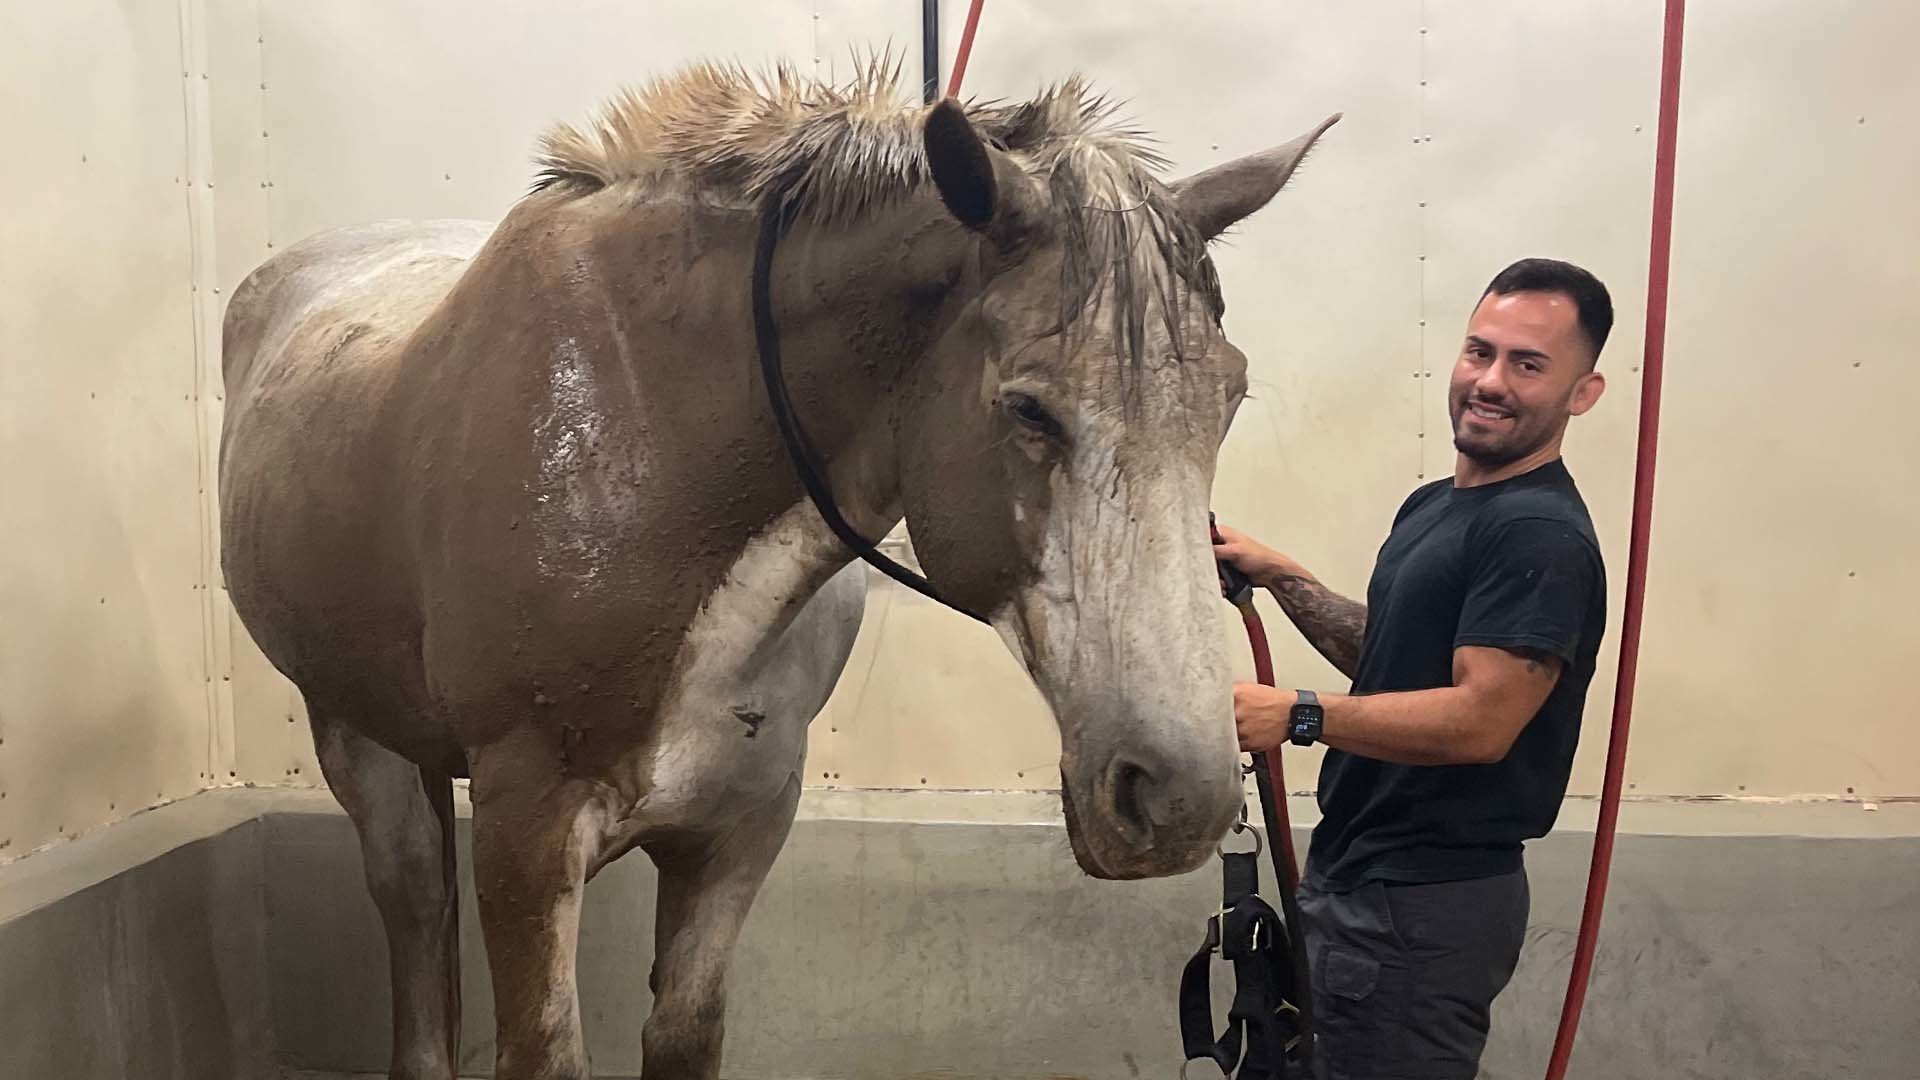 Hercules would roll in the mud or dirt every night. So, Officer Juan Restrepo knew he'd have to give his partner a bath at the department's stable before they went out on patrol. Atlanta Police Department photo.